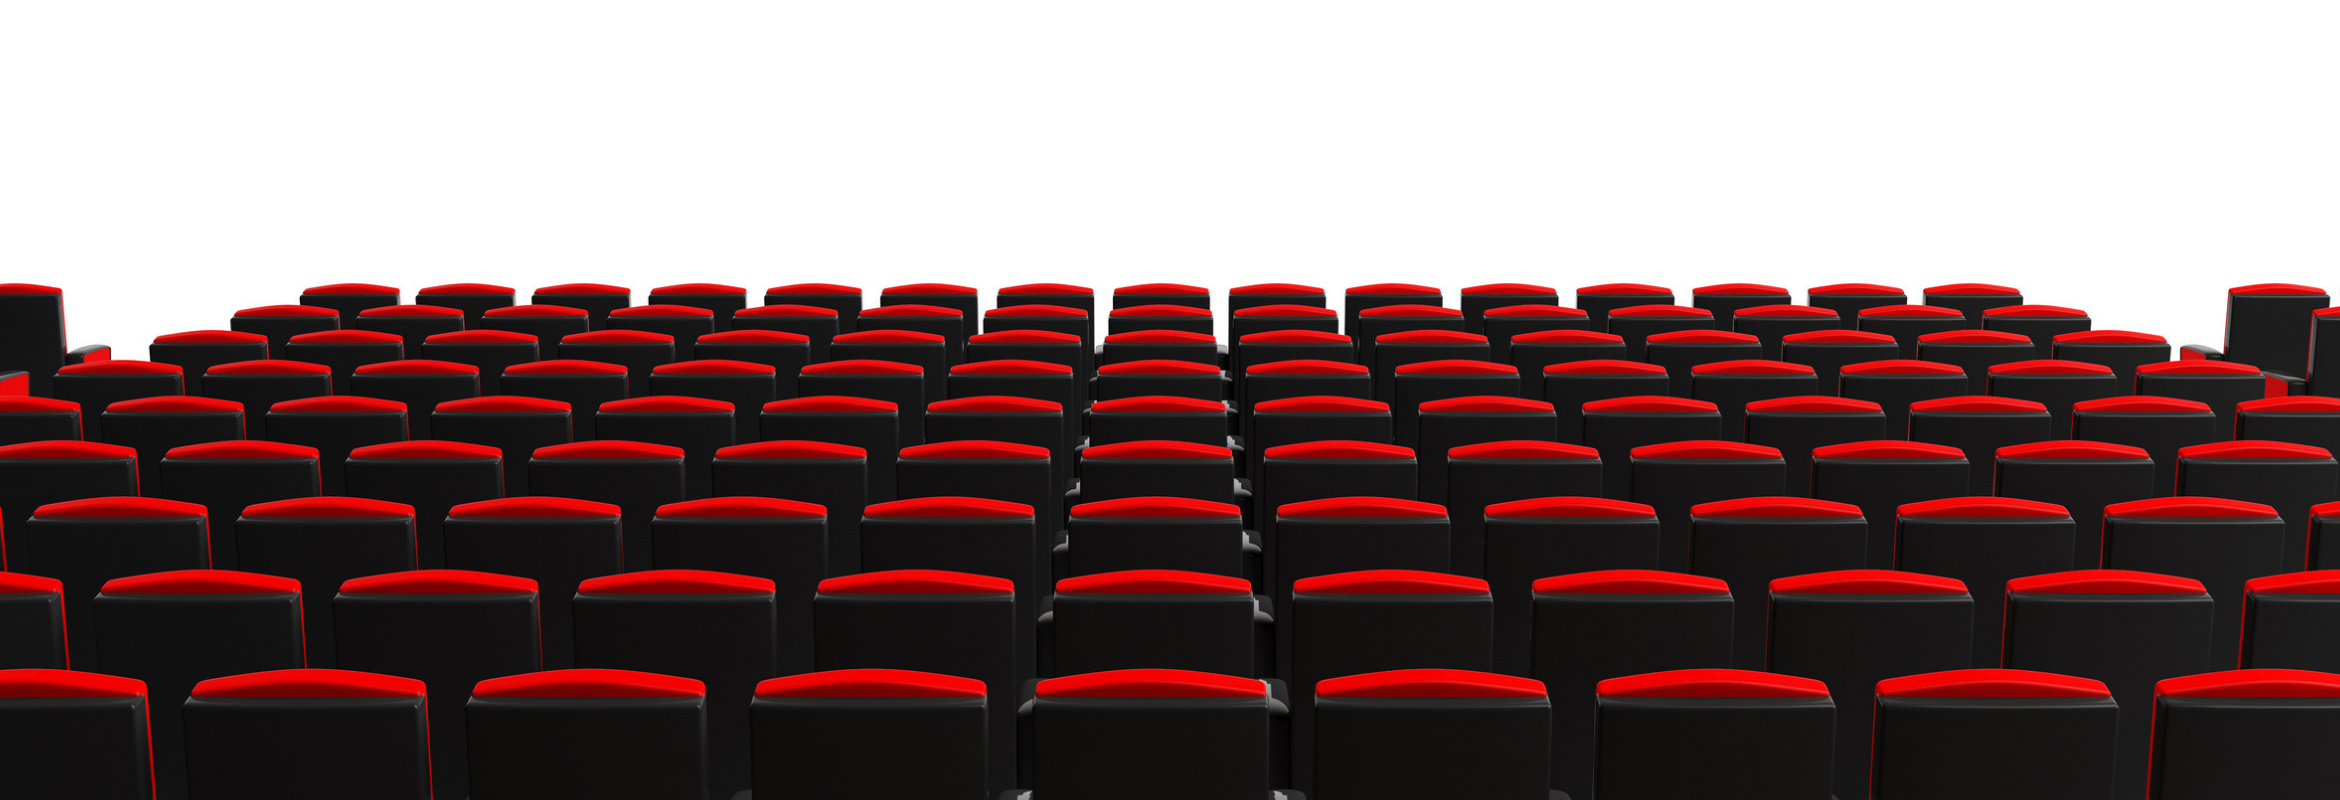 An image of movie theater seats.